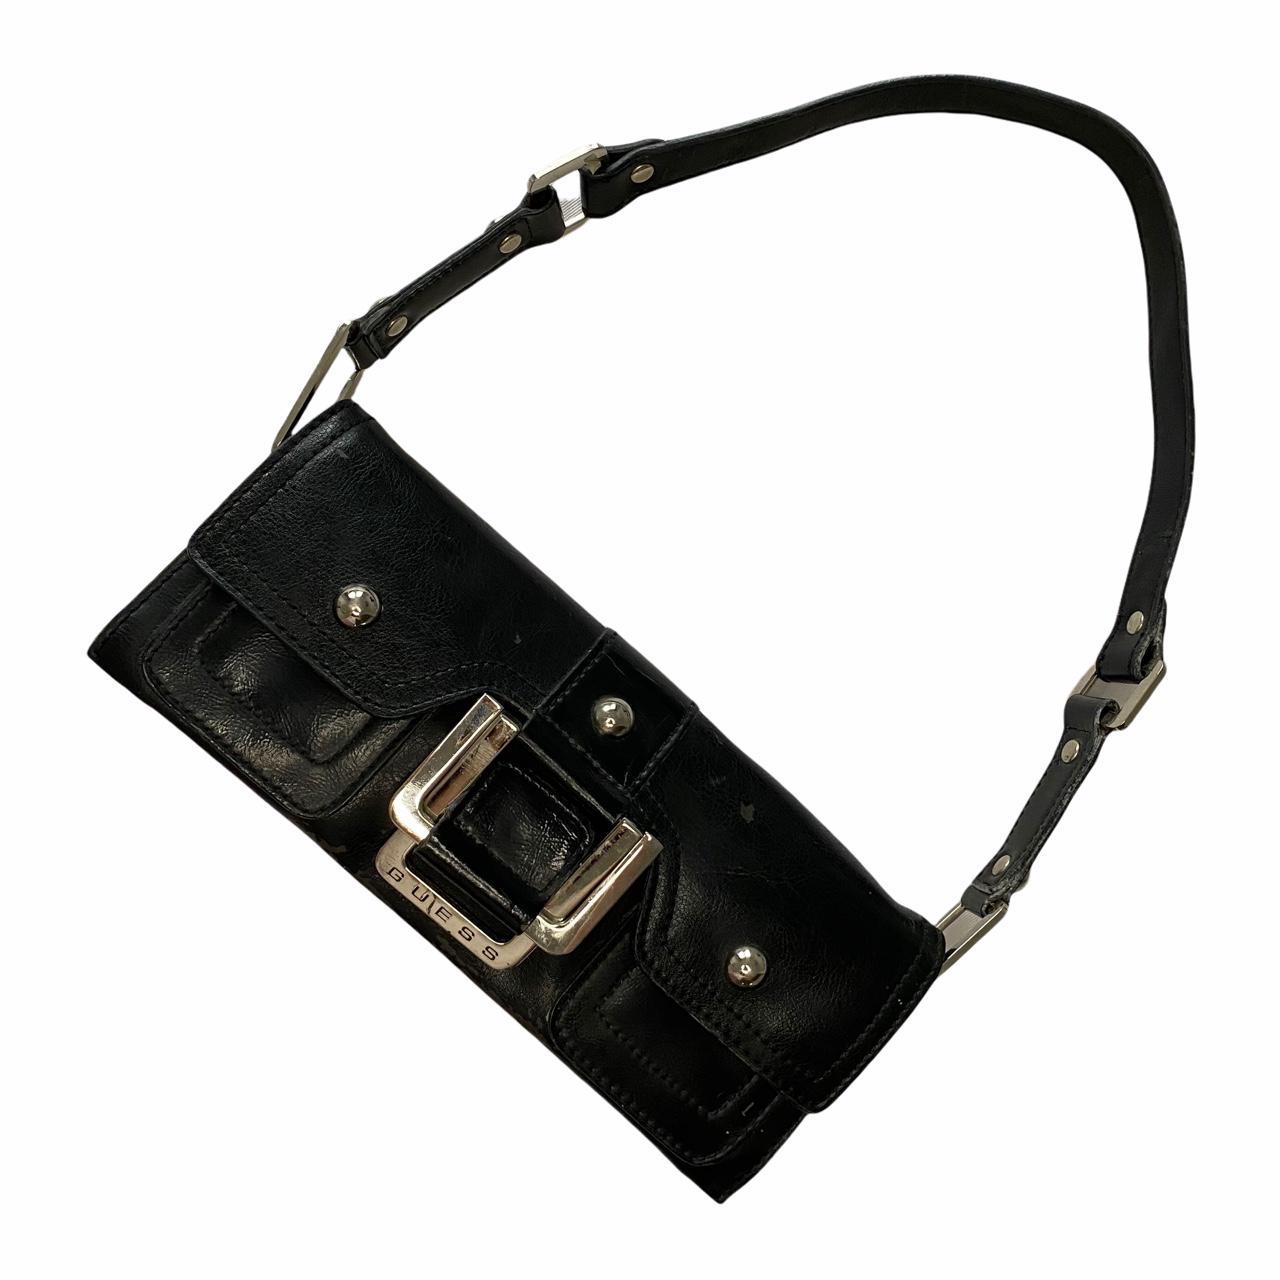 Guess Women's Black and Silver Bag